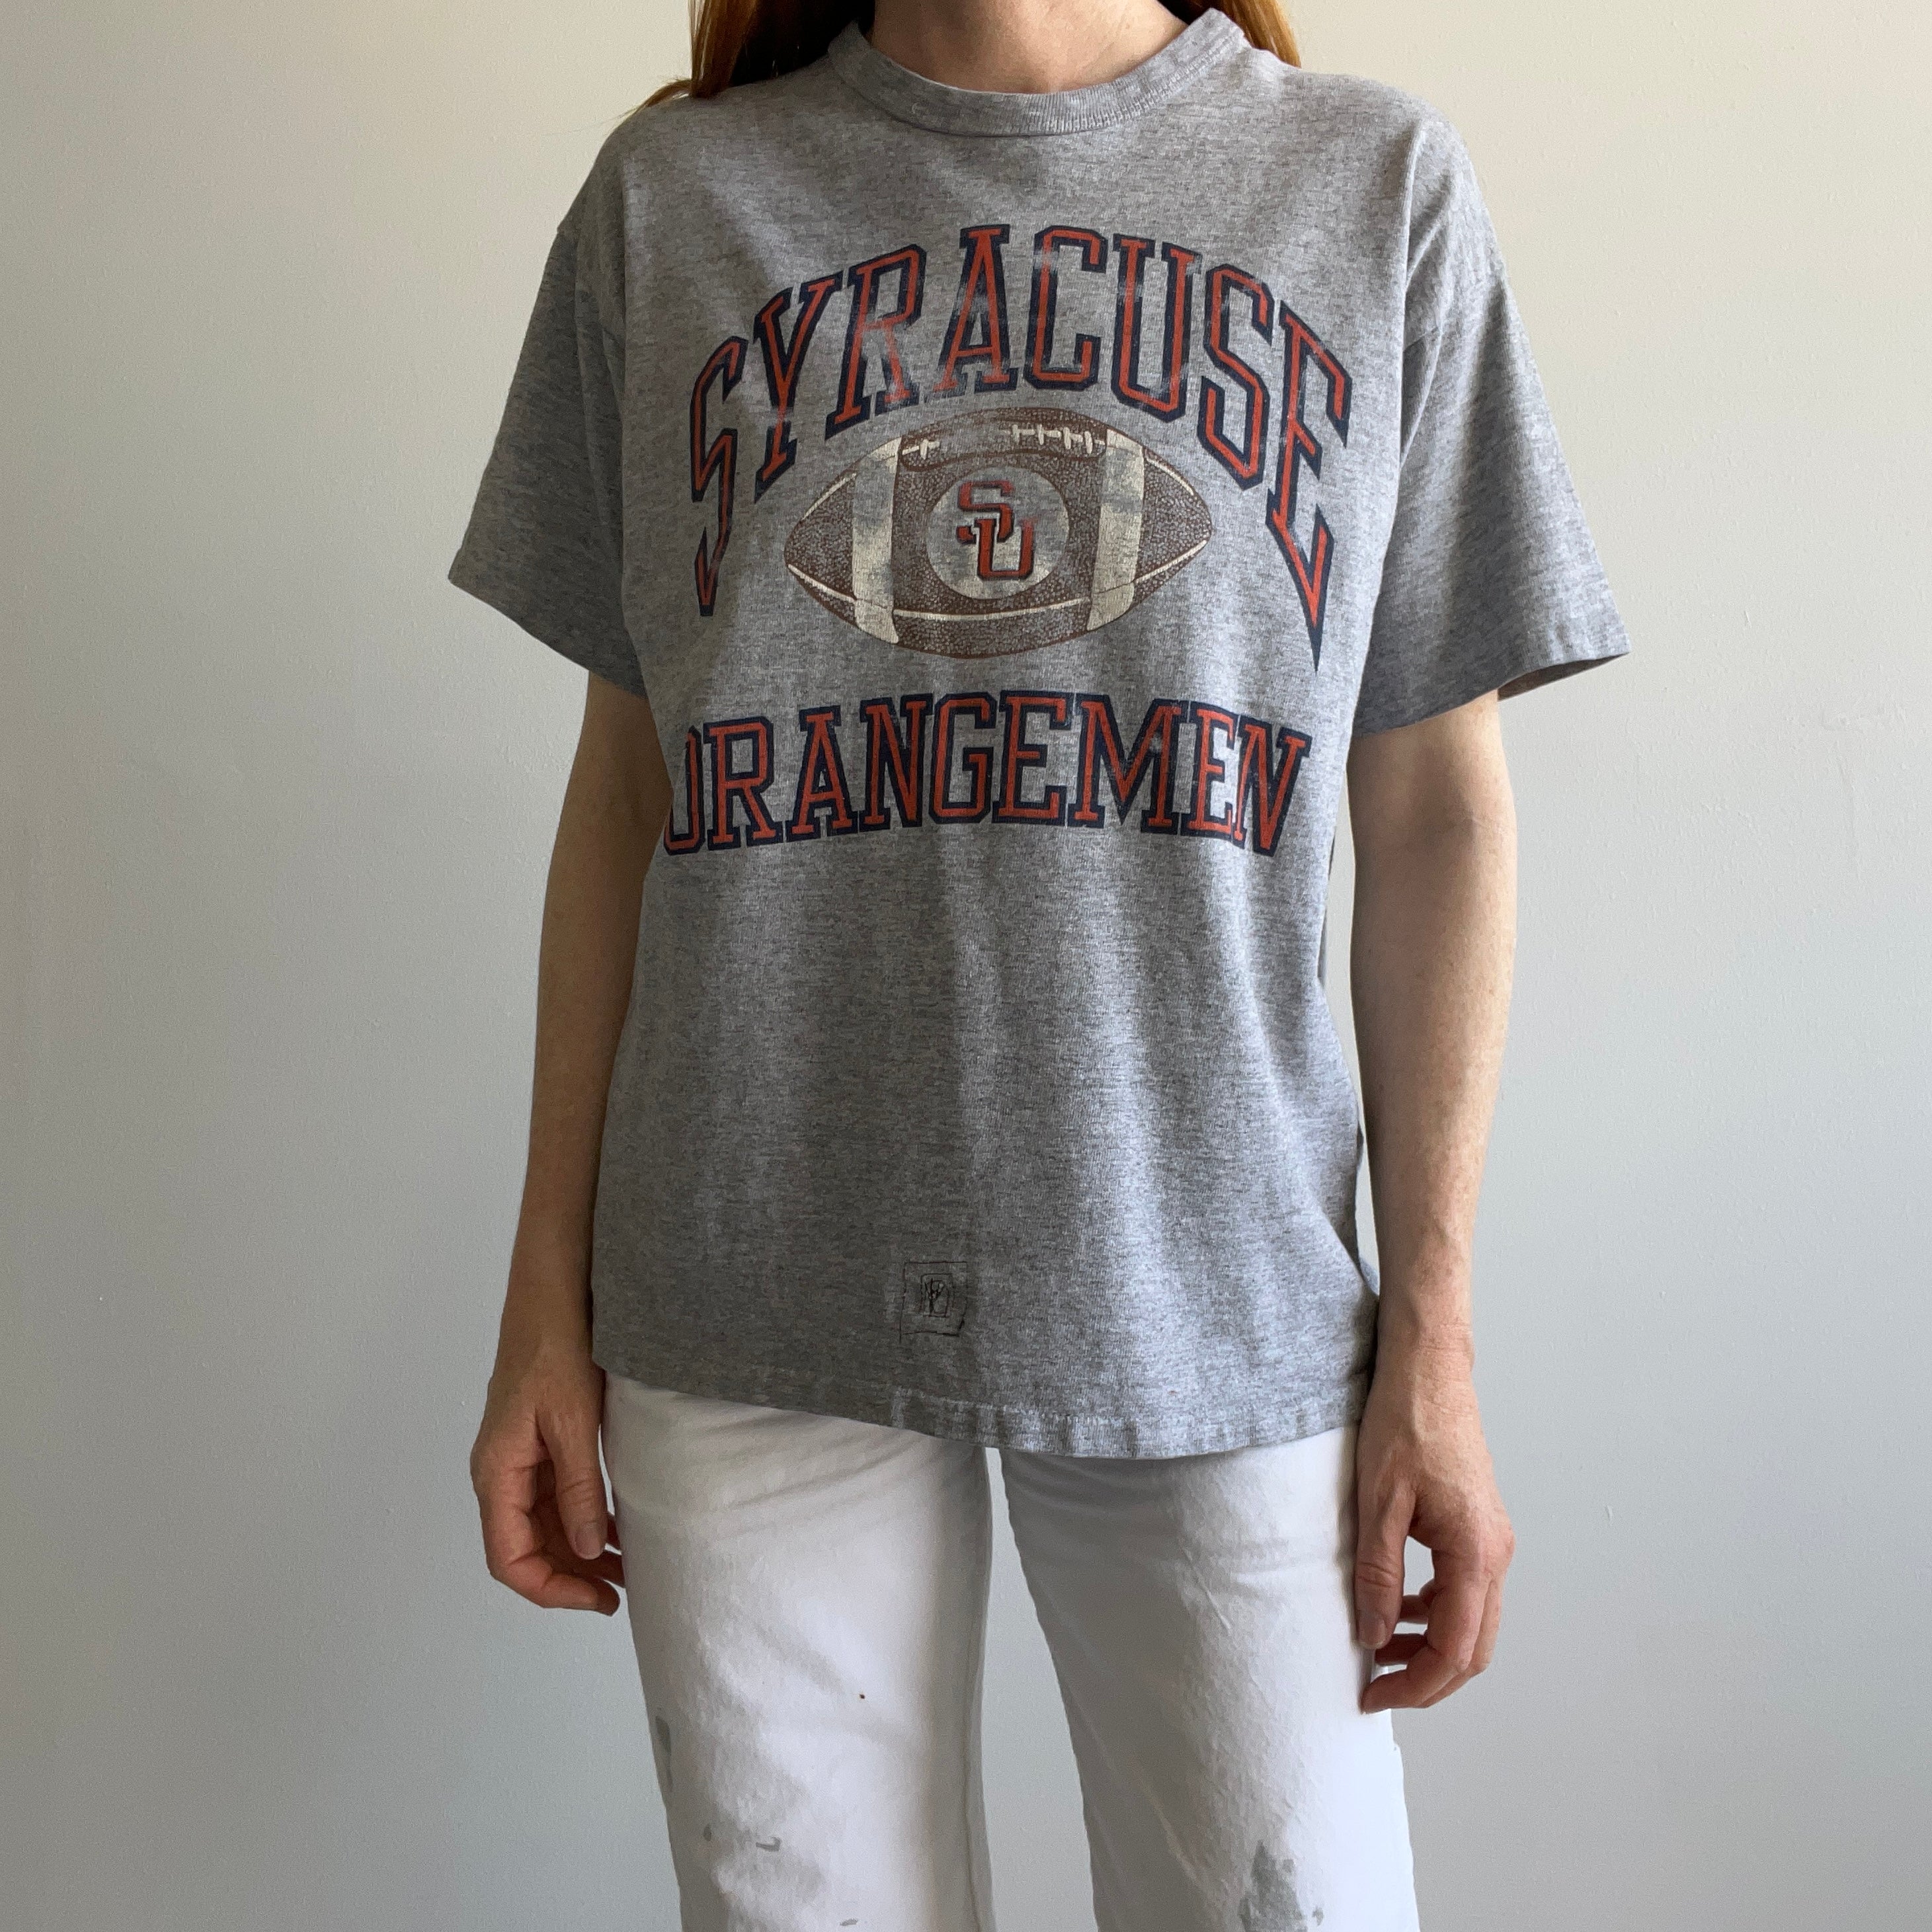 1980/90s Mended Syracuse Cotton T-Shirt by Champion - WOAH